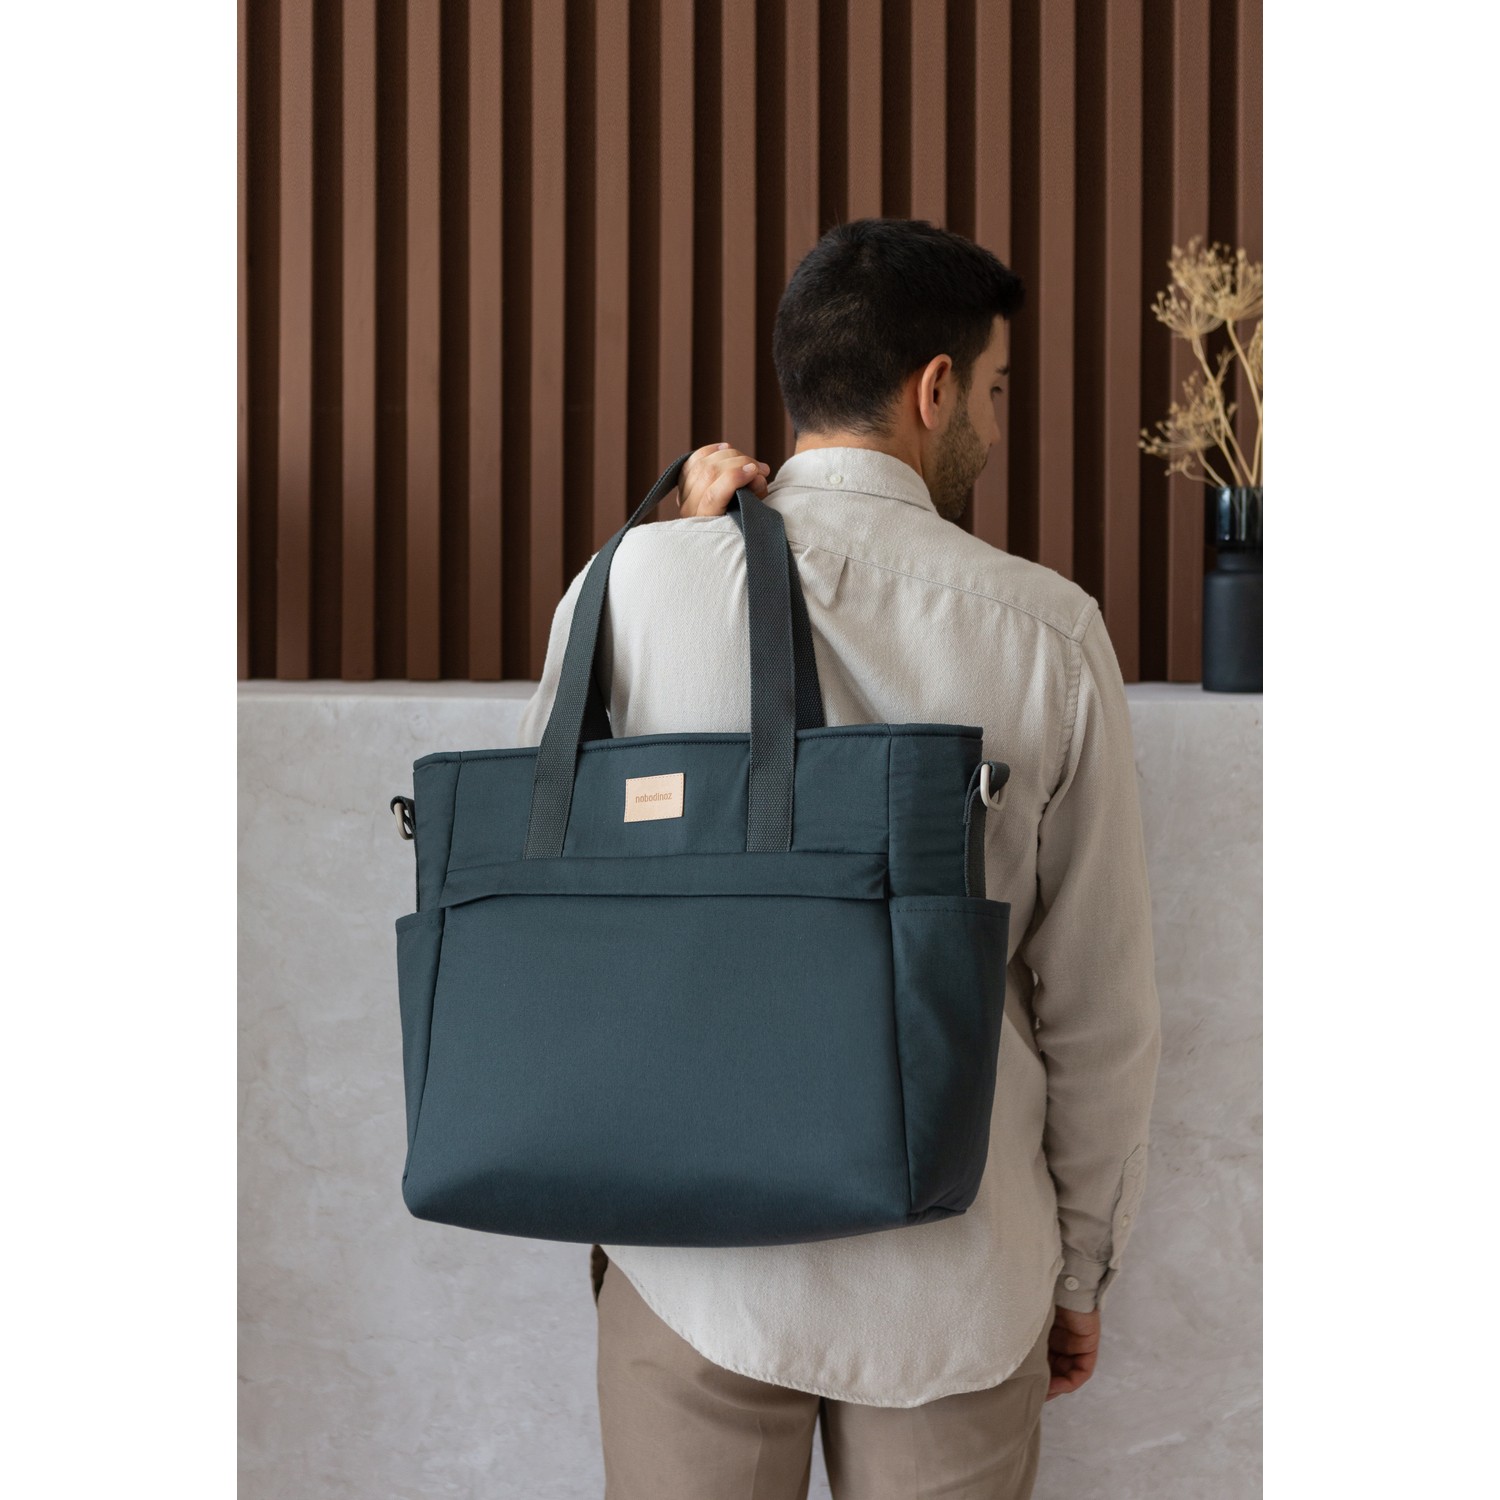 sac-a-langer-baby-on-the-go-carbon-blue-nobodinoz.bcq343.max